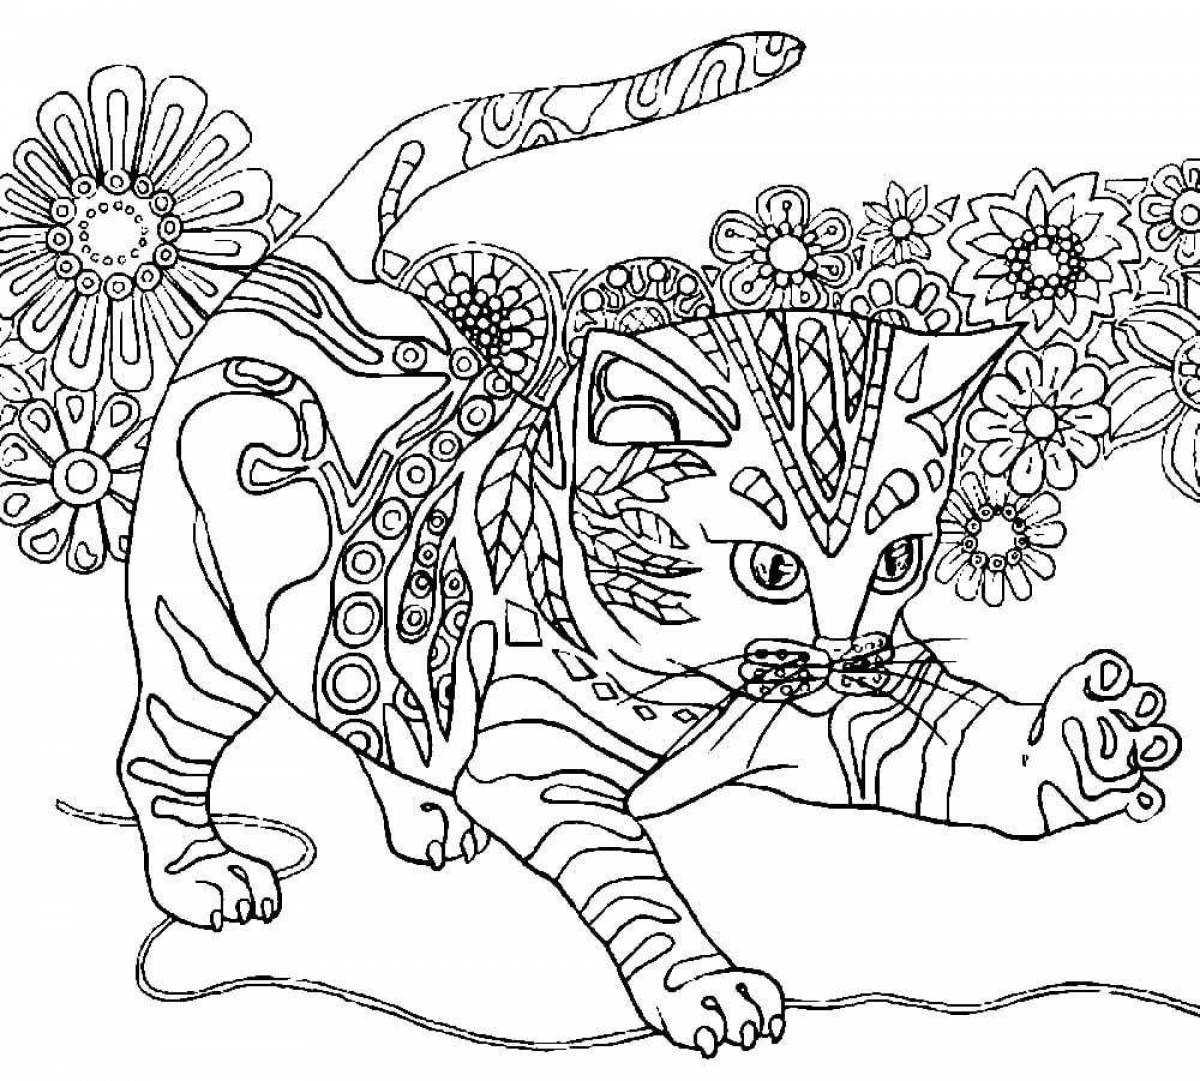 Attractive coloring book for girls 12 years old animals